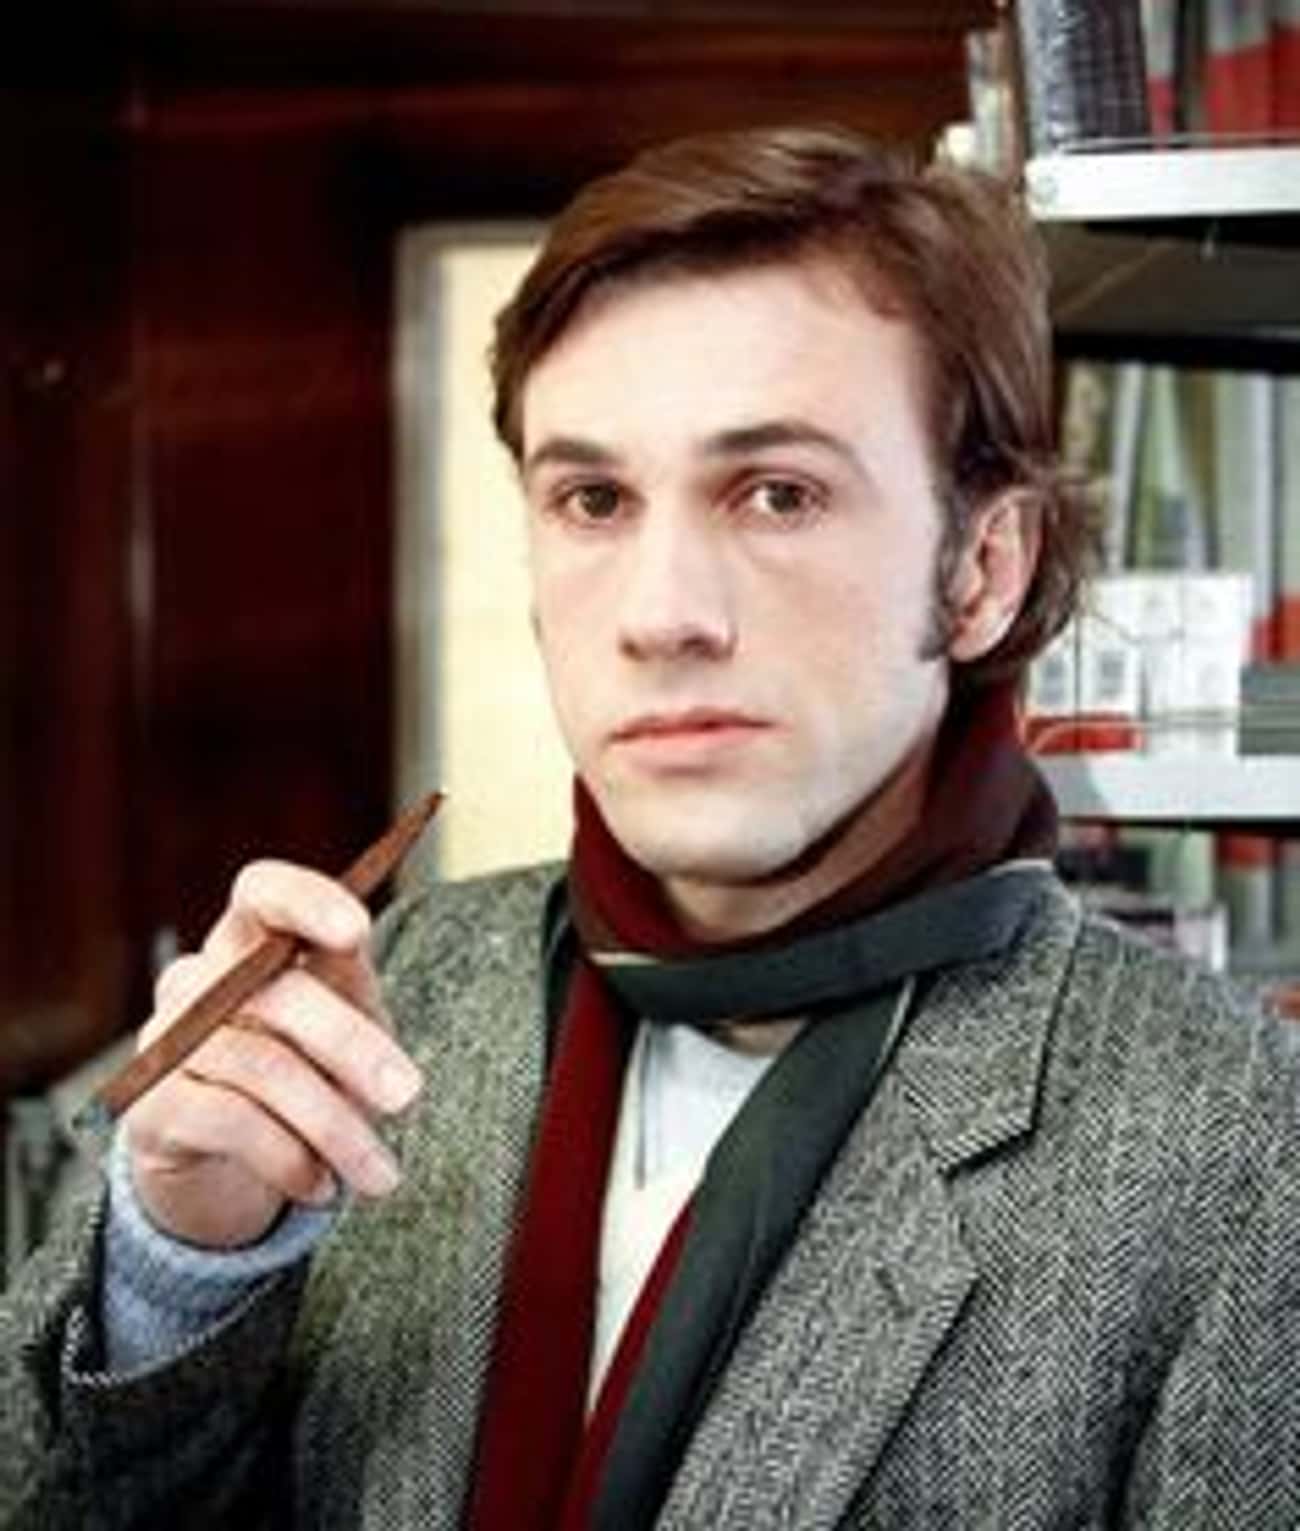 Young Christoph Waltz in Speckled Sports Coat and Red Scarf